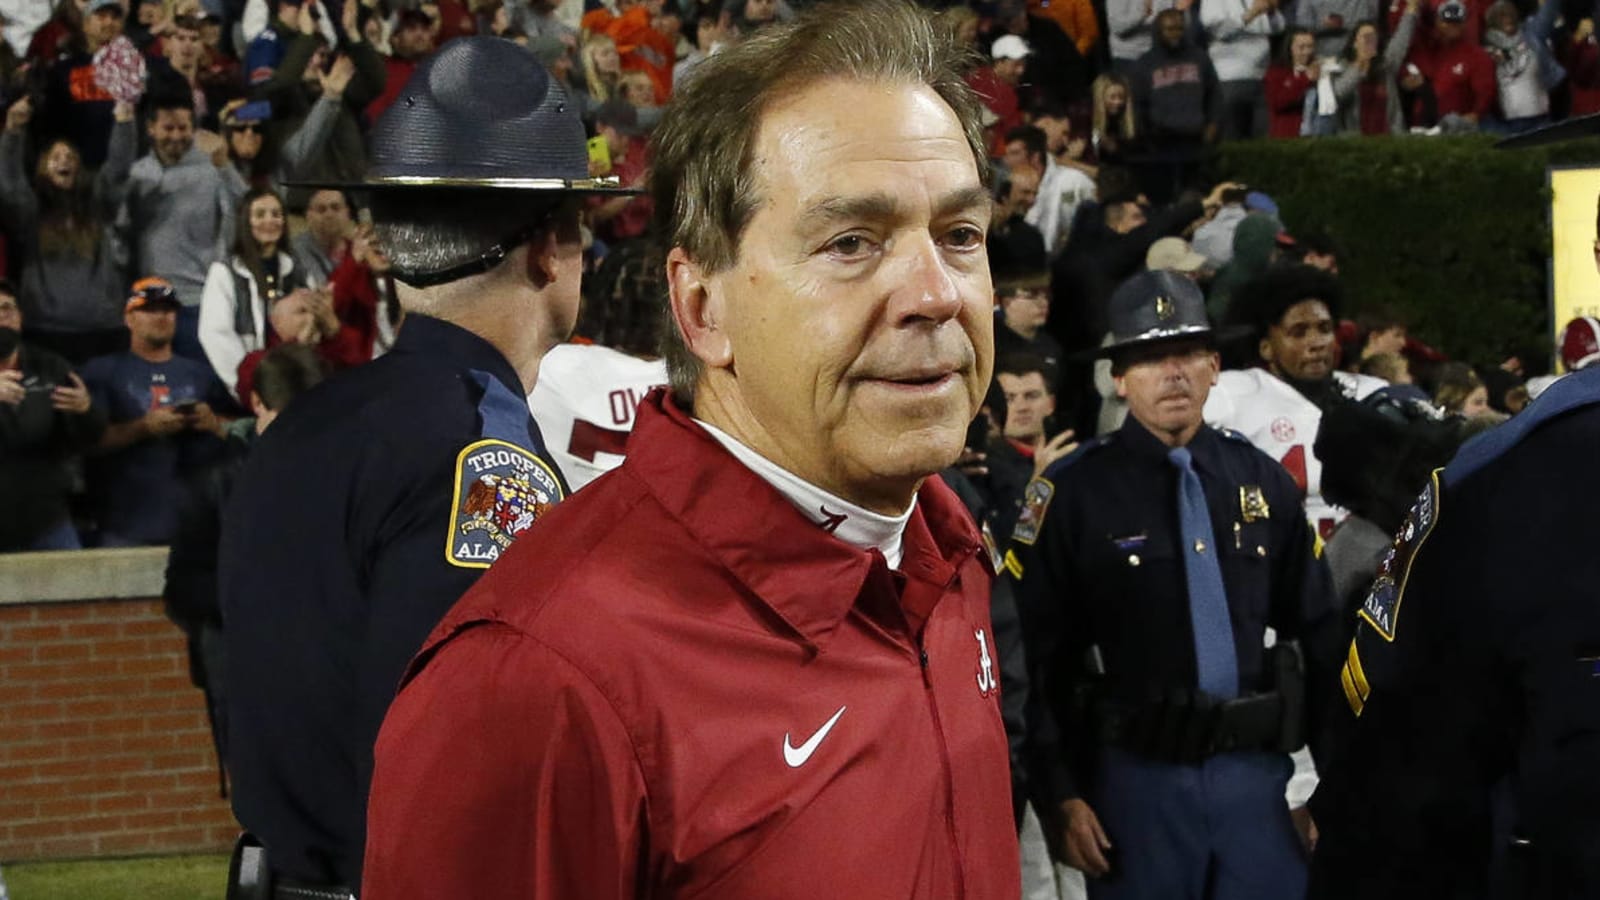 Watch: Alabama's Nick Saban dances in locker room after 'special' Iron Bowl victory